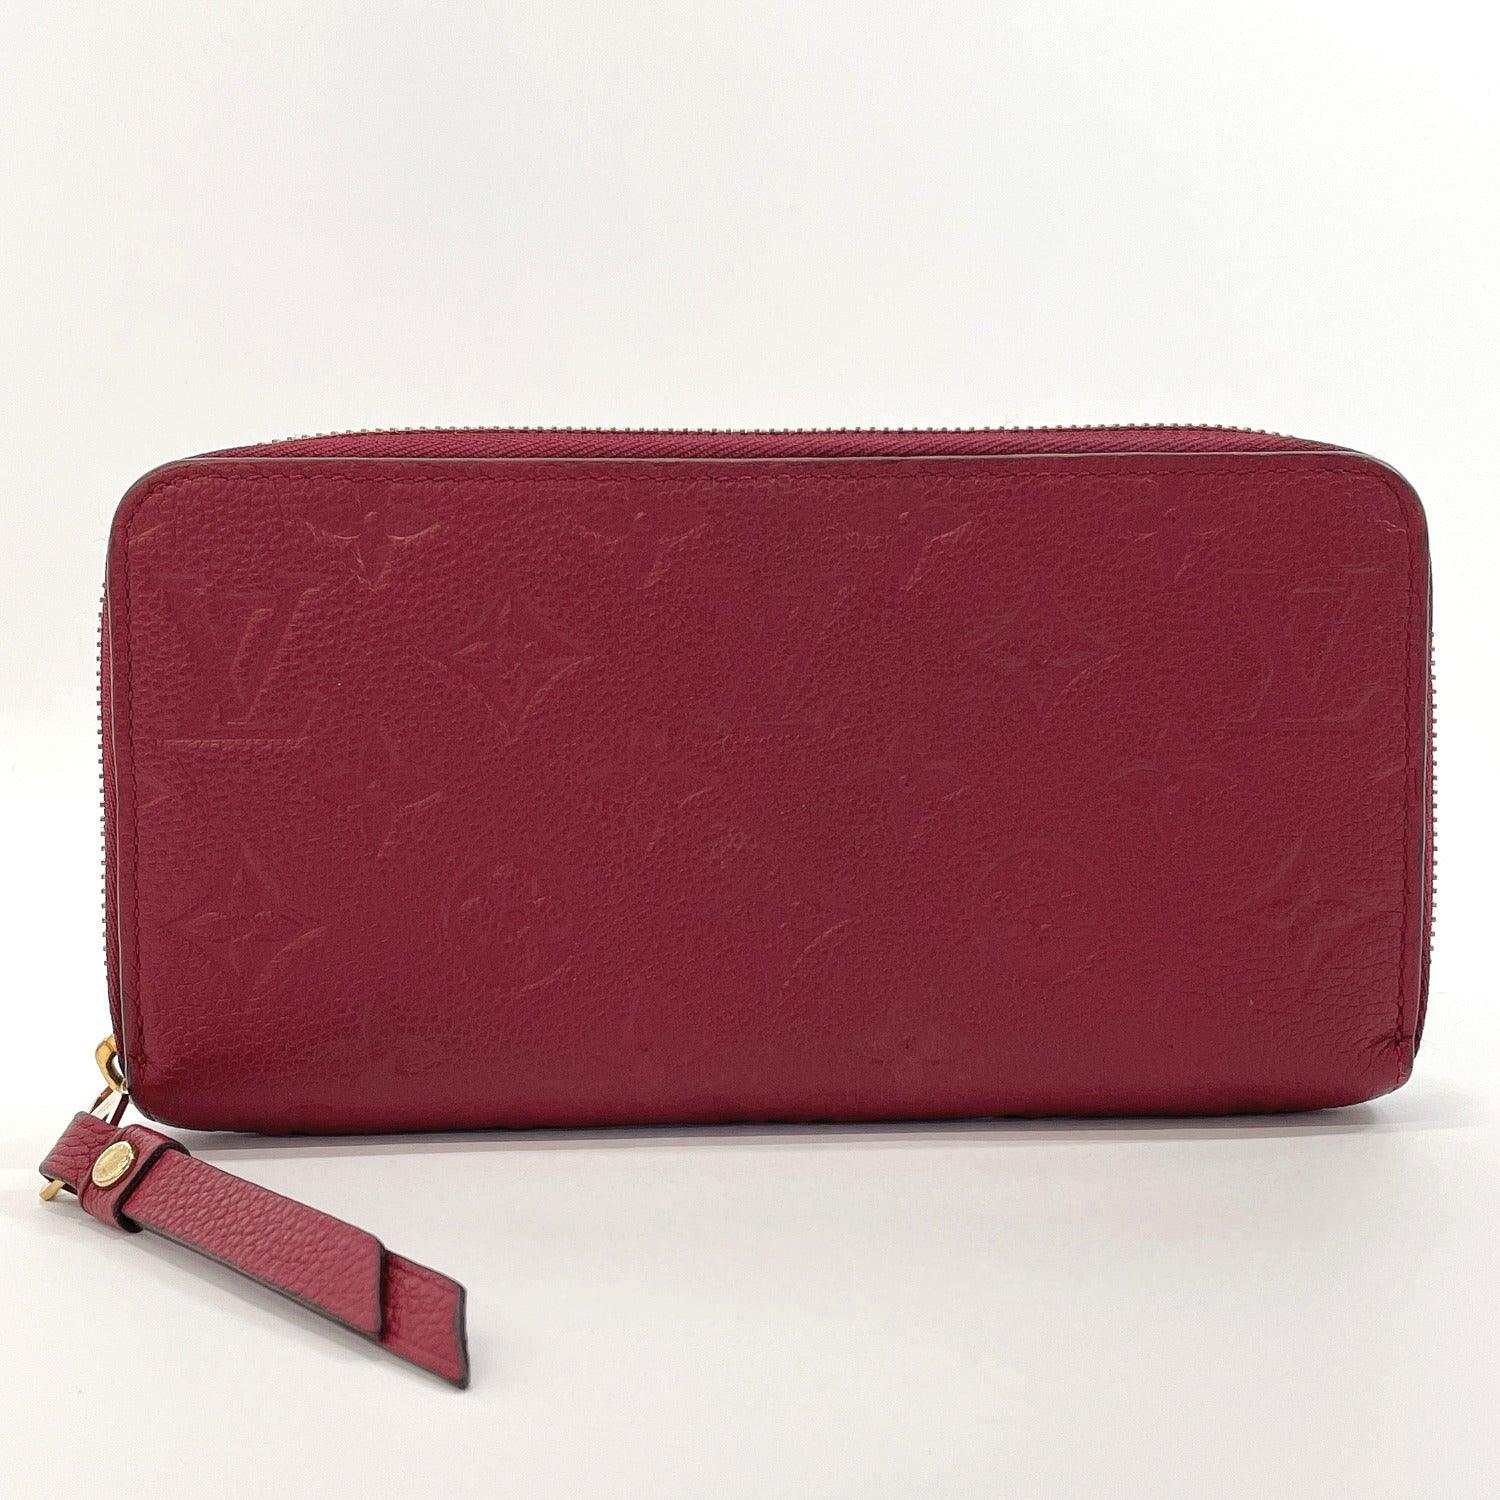  Louis Vuitton M69028 Coin Case, Women's, Pouch, Heart, Red,  Pink, Gradient, Monogram Verni, Patent Calf Leather, Portmonet Cool, pink :  Clothing, Shoes & Jewelry